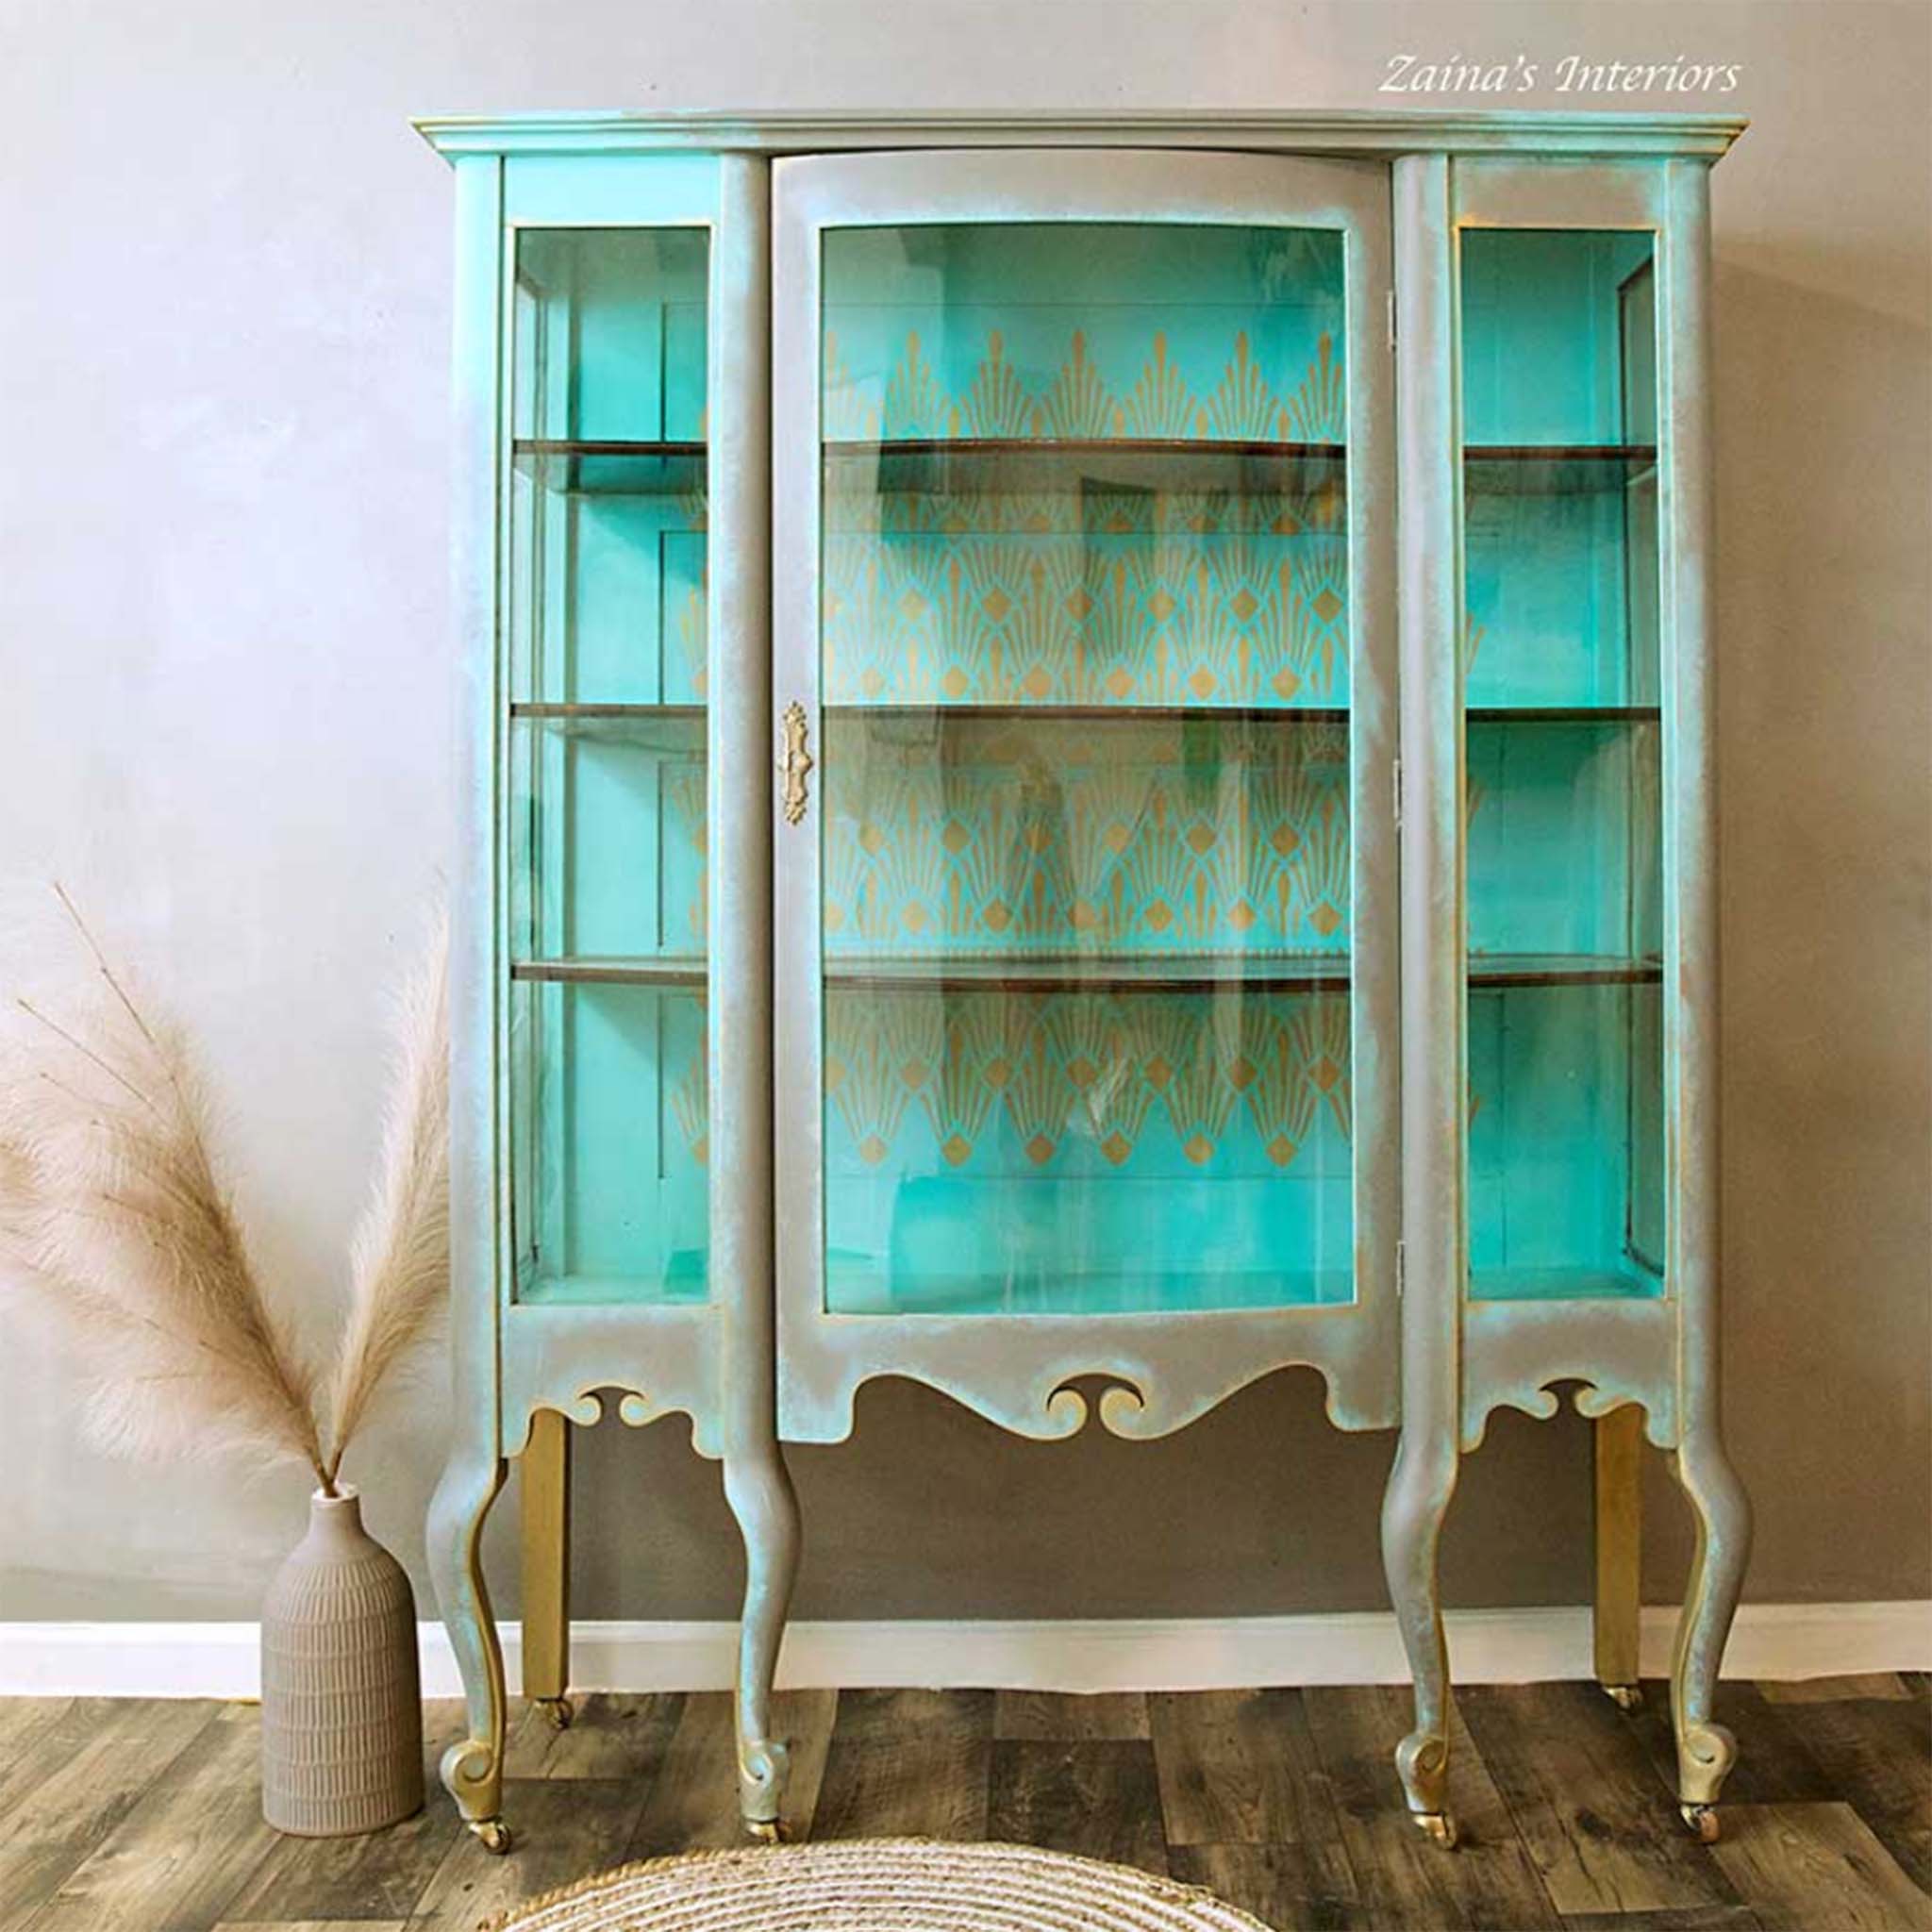 A wood and glass hutch refurbished by Zaina's Interiors is painted a blend of light aqua and beige on the outside wood and light aqua on the interior wood. ReDesign with Prima's Sunlit Diamonds stencil in gold is featured against the inside backboard.